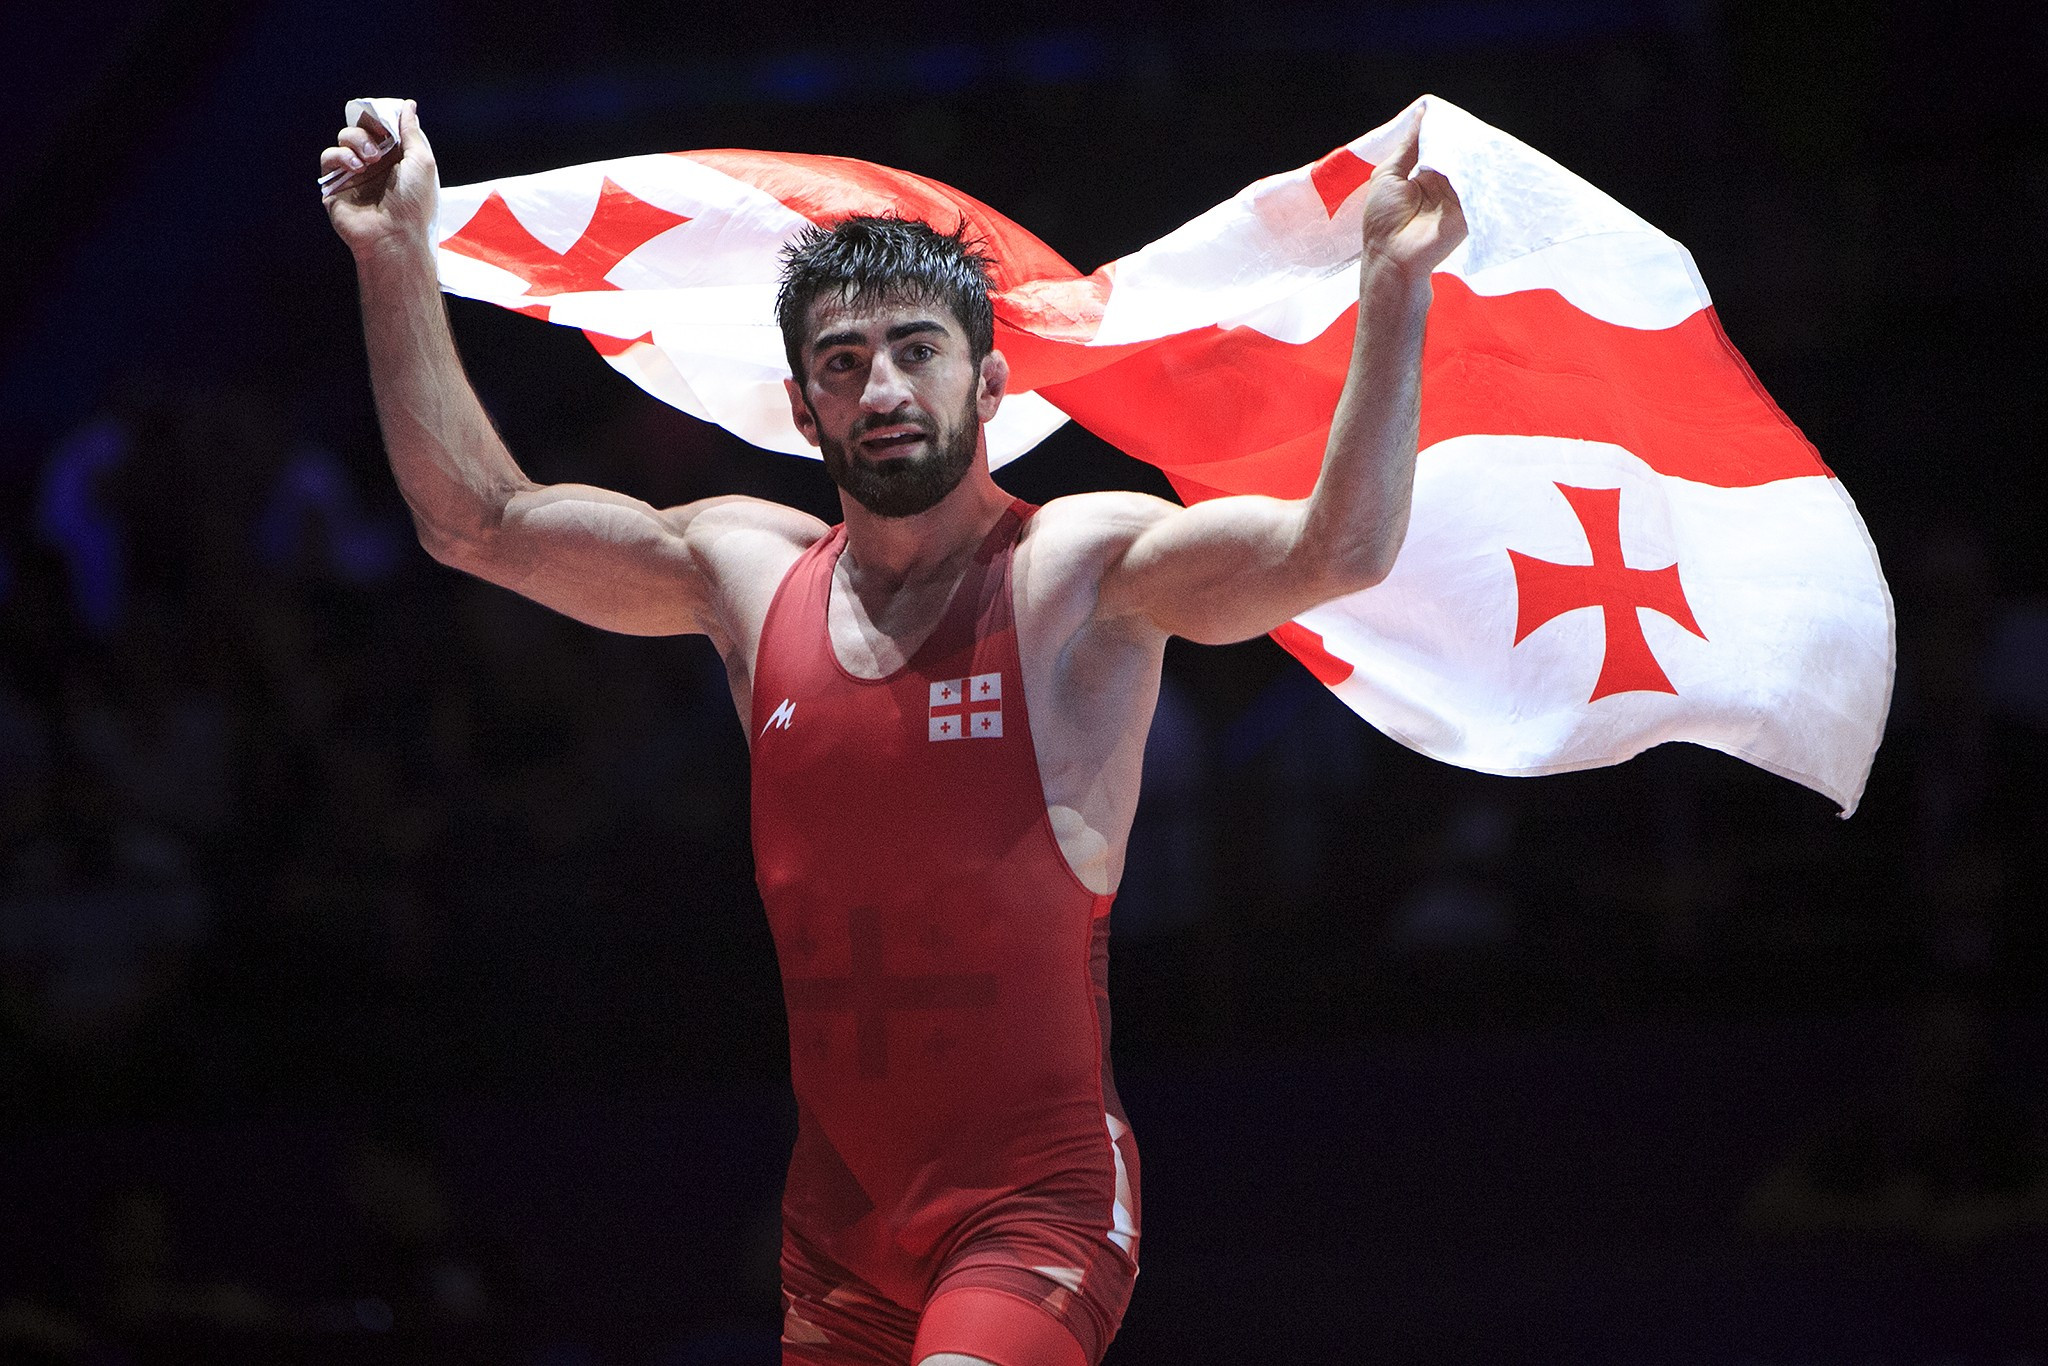 Synder wins "Match of the Century" on final day of UWW World Championships